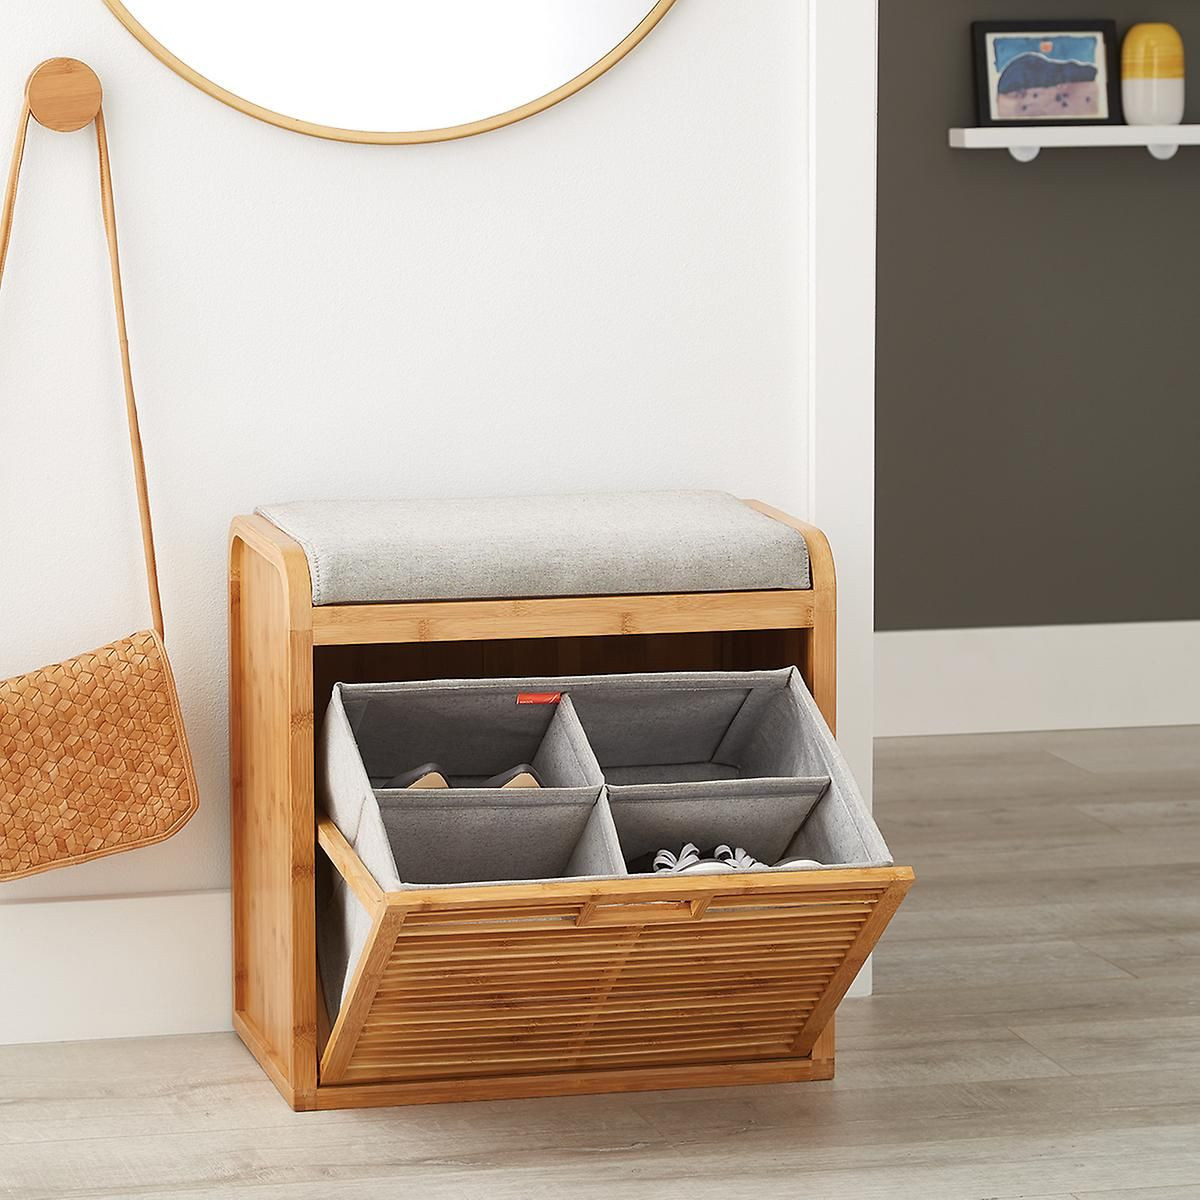 Small Bench With Storage
 Lotus Bamboo Storage Bench With images